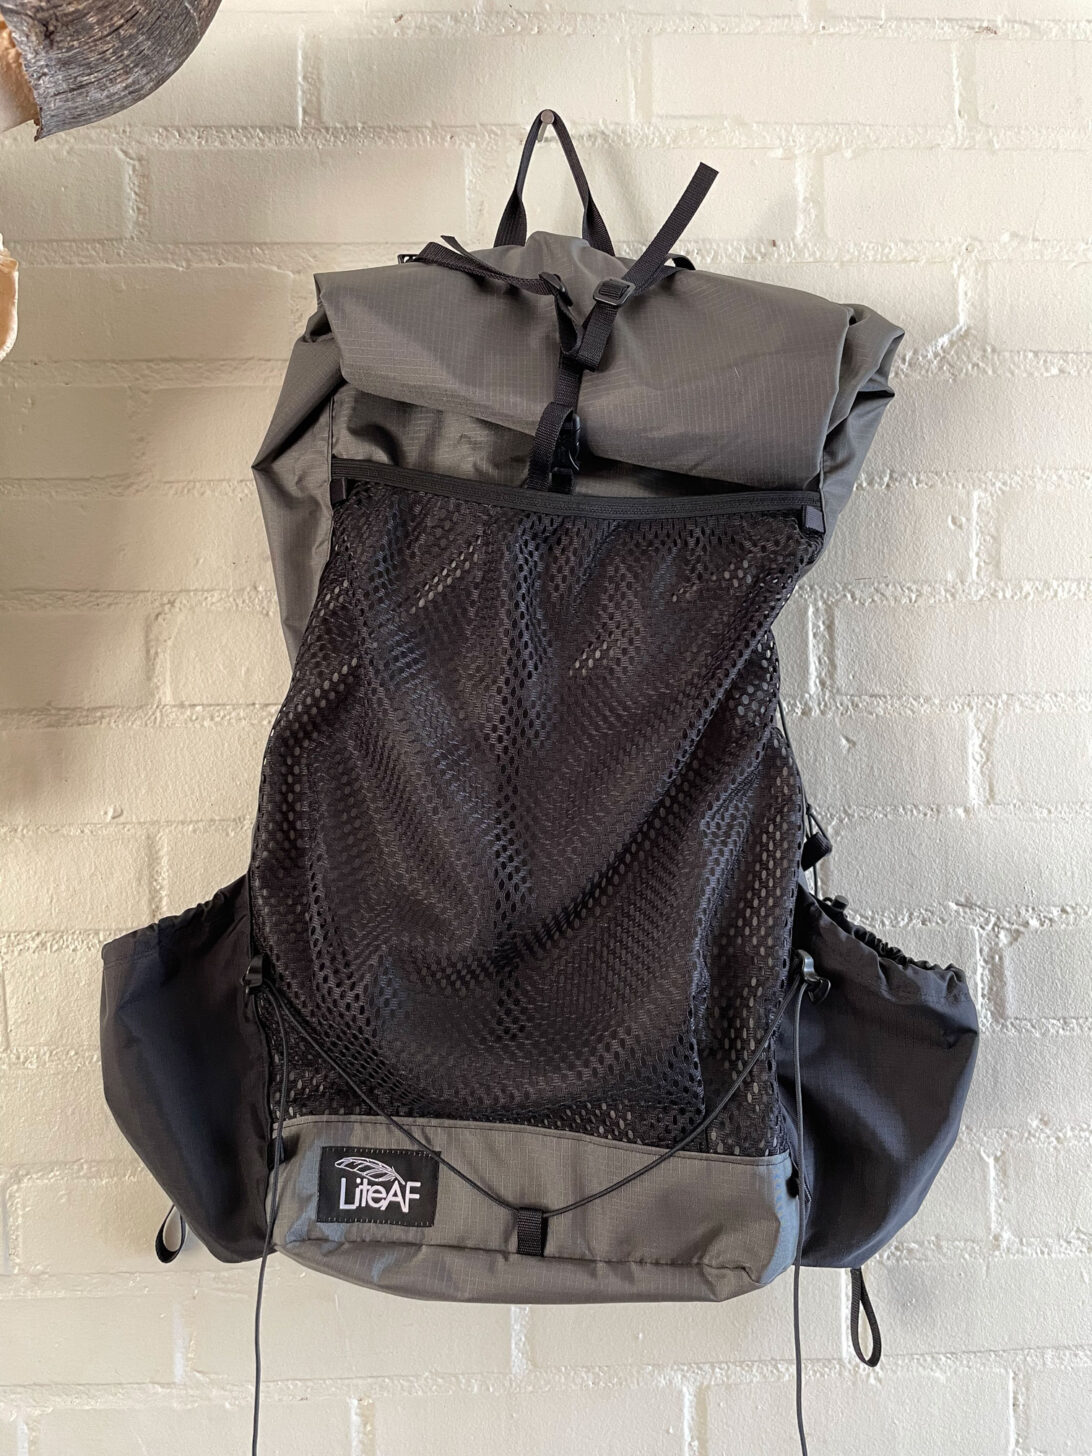 NEW LiteAF Multi-Day 35 PRICE LOWERED - Backpacking Light